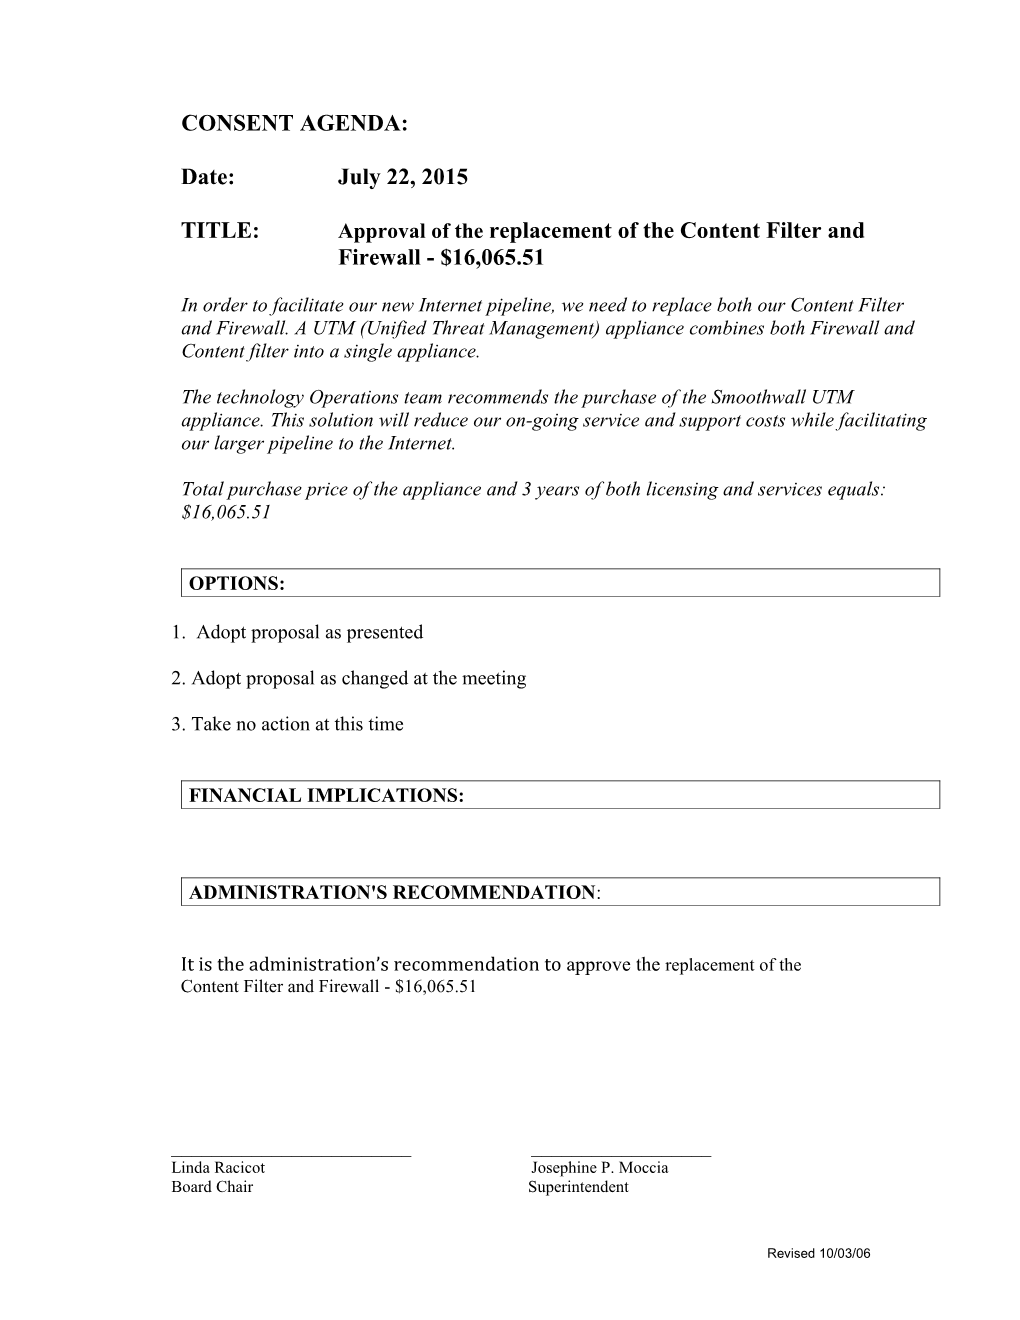 TITLE: Approval of the Replacement of the Content Filter and Firewall - $16,065.51